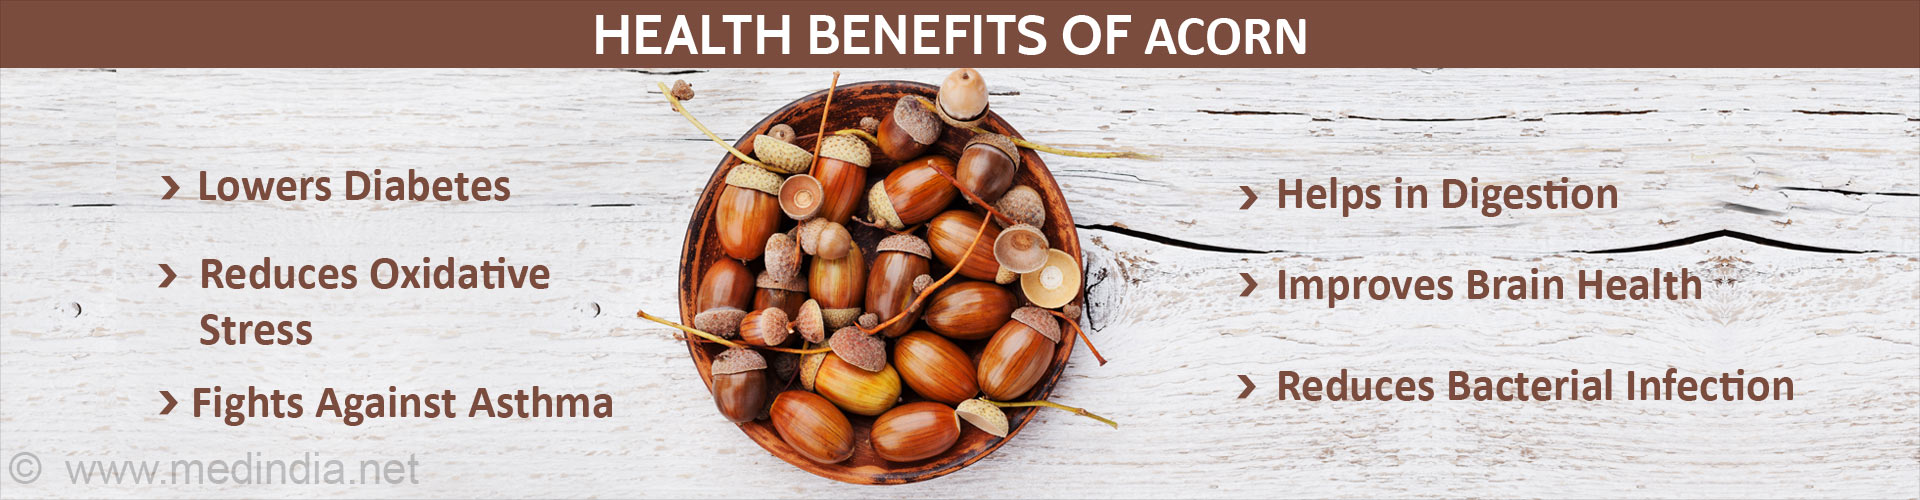 Health benefits of acorn
- Lowers diabetes
- Reduces oxidative stress
- Helps in digestion
- Improves brain health
- Reduces bacterial infection